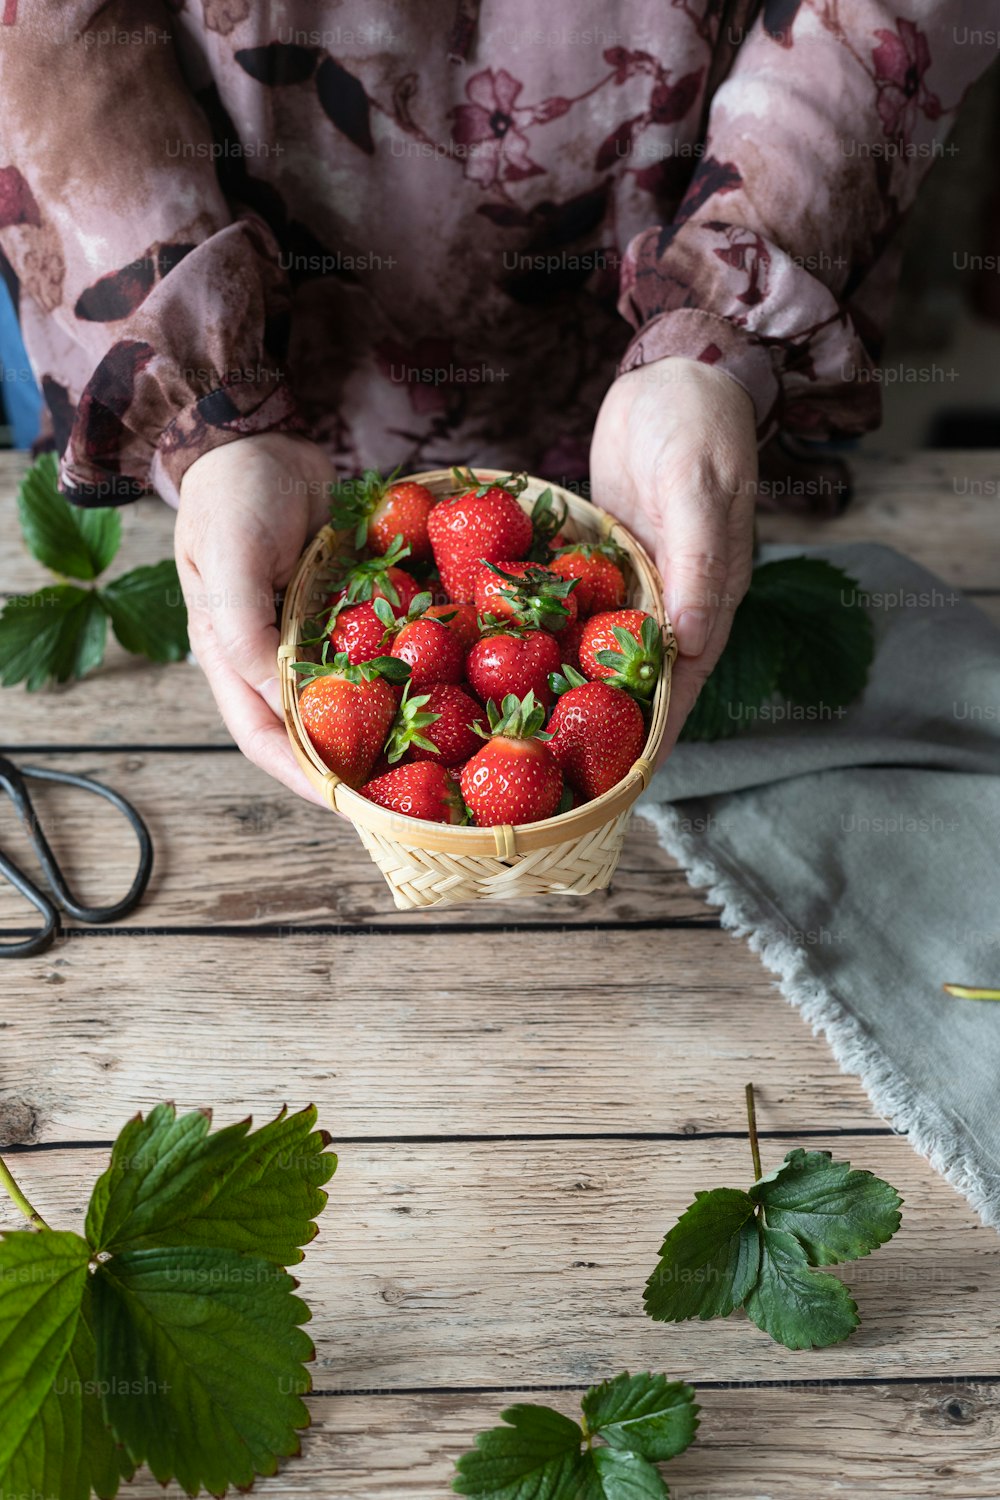 a person holding a basket of strawberries on a table